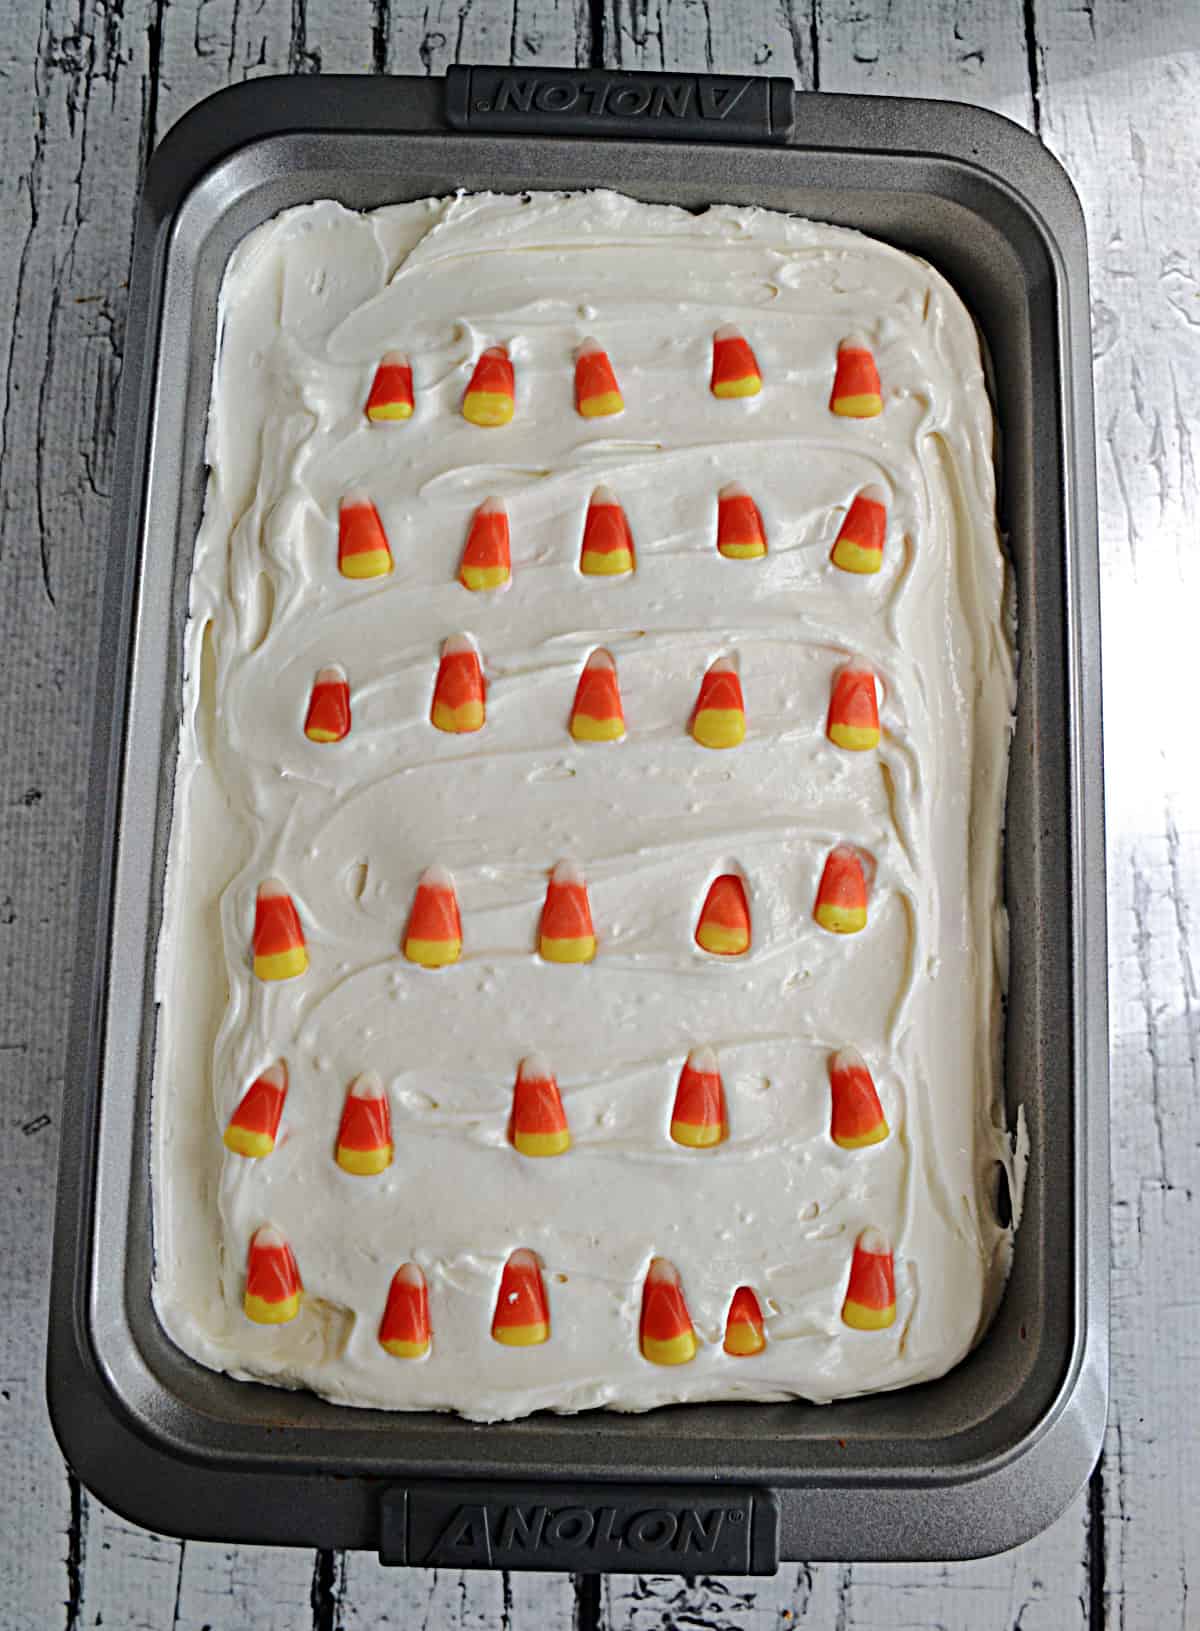 A cake with white frosting and candy corn on top.